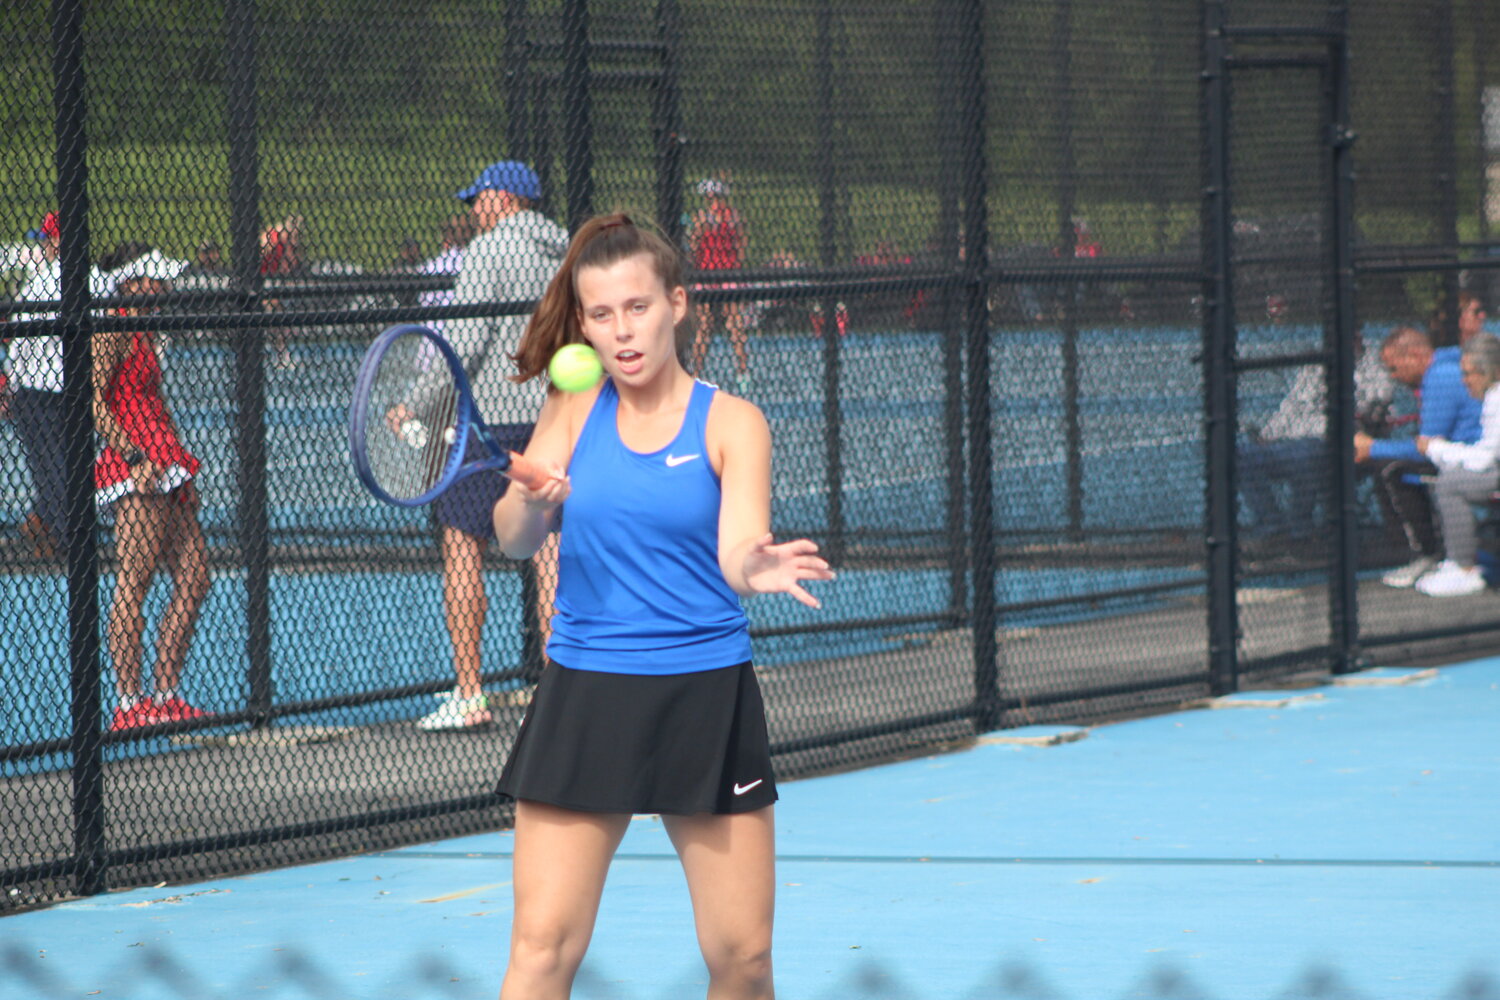 CHS senior Amy Weliever helped the Athenians get back to the sectional title game with a win at three singles. CHS is in search of its fourth straight sectional title.